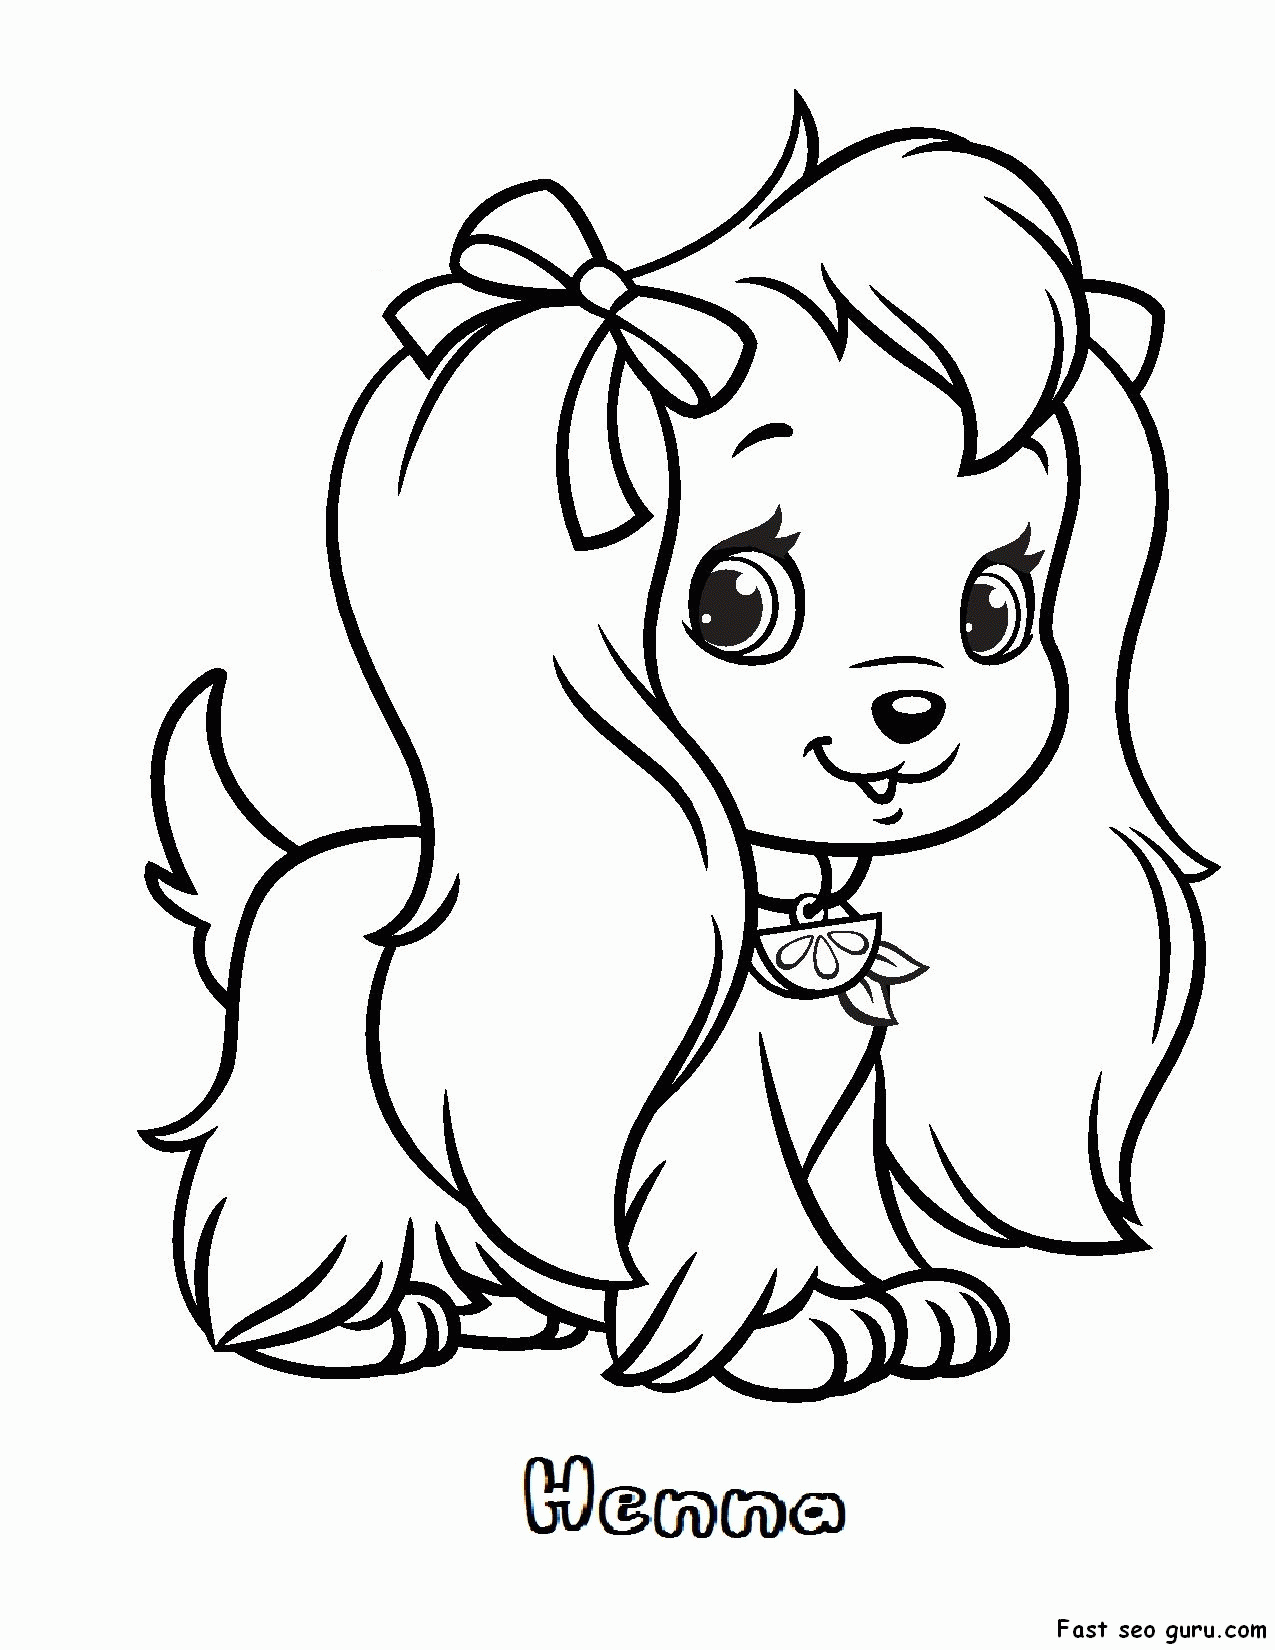 Strawberry Shortcake Pets Coloring Pages for kids #2668 Strawberry ...